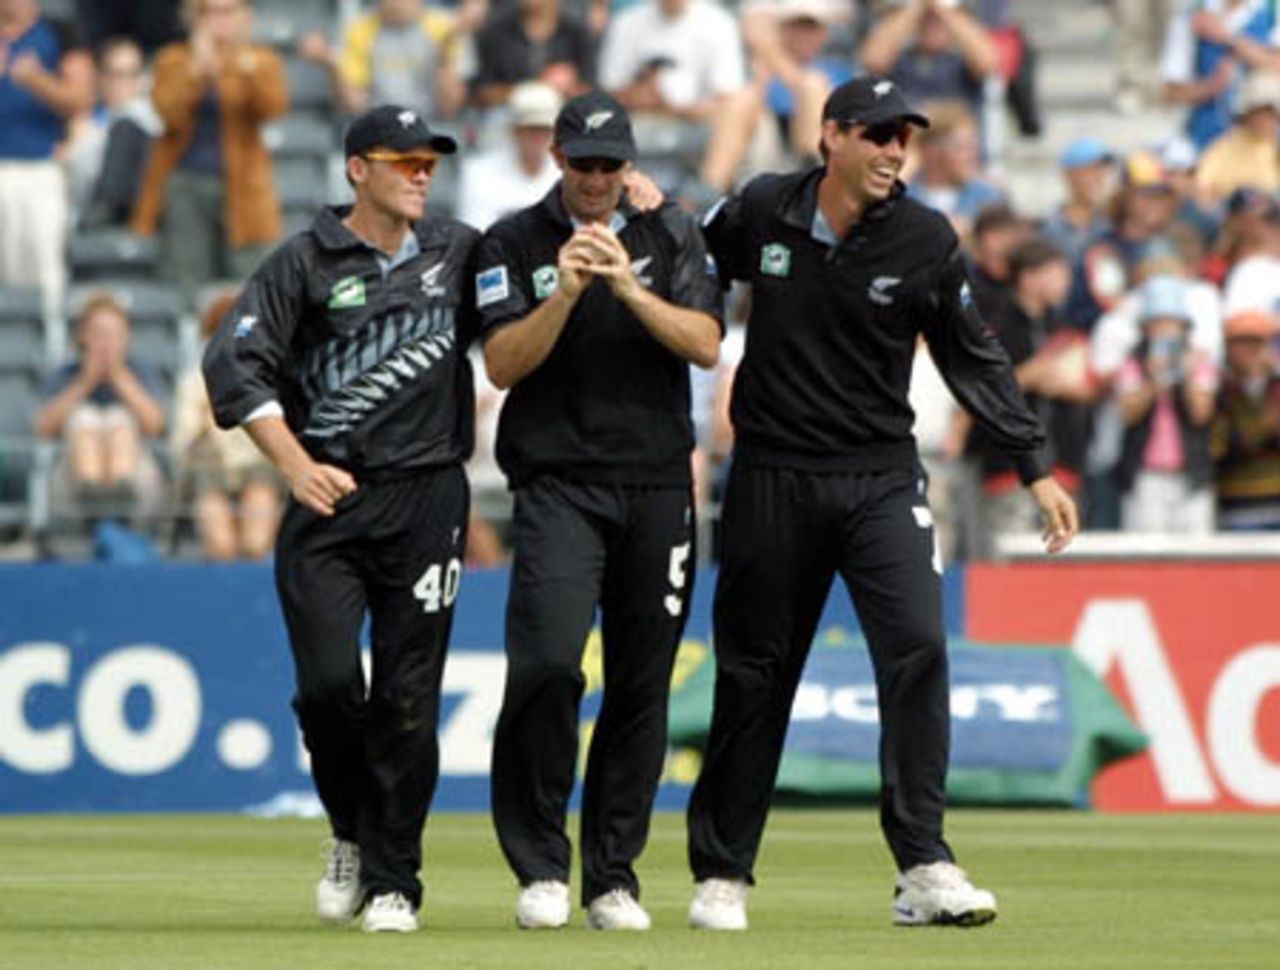 New Zealand fielder Chris Harris (centre) is congratulated by team-mates Lou Vincent (left) and Stephen Fleming after completing a catch at backward point to dismiss Pakistan batsman Saleem Elahi from the bowling of Jacob Oram for 13. 4th One-Day International: New Zealand v Pakistan at Jade Stadium, Christchurch, 25 February 2001.